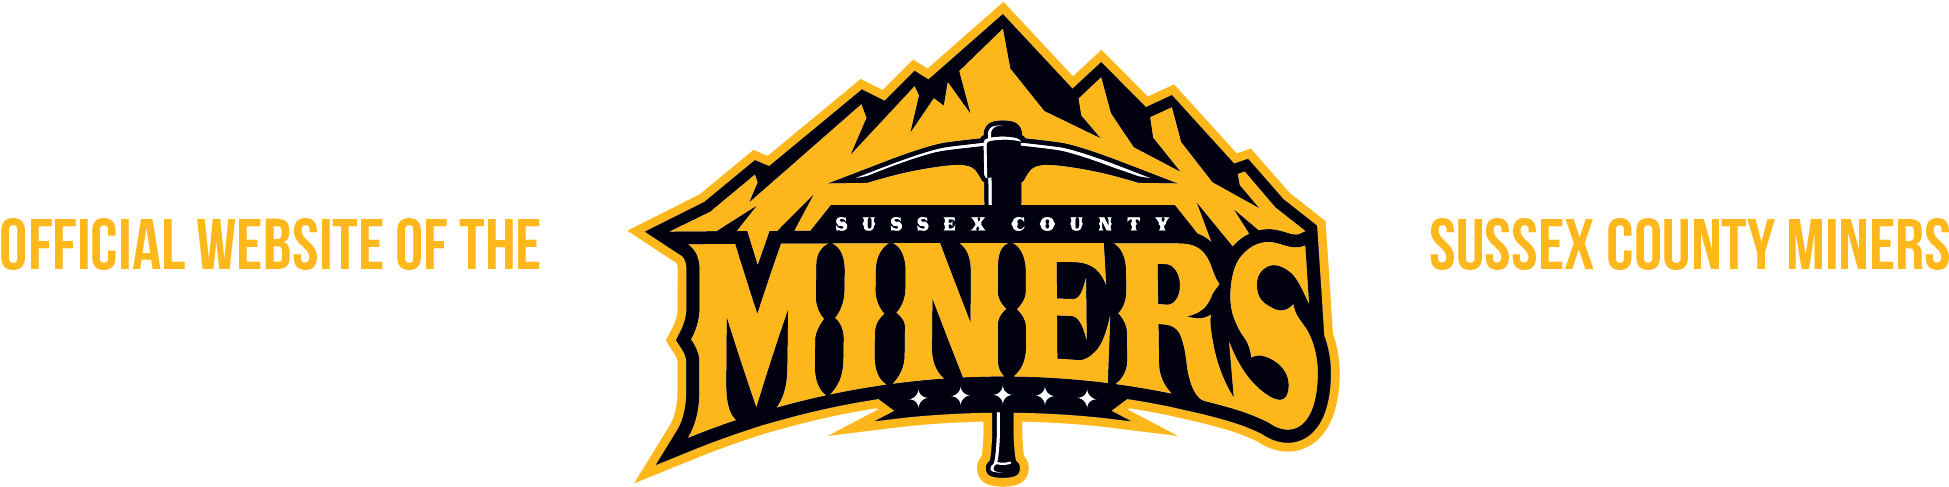 Open Menu - Sussex County Miners (2025x486)